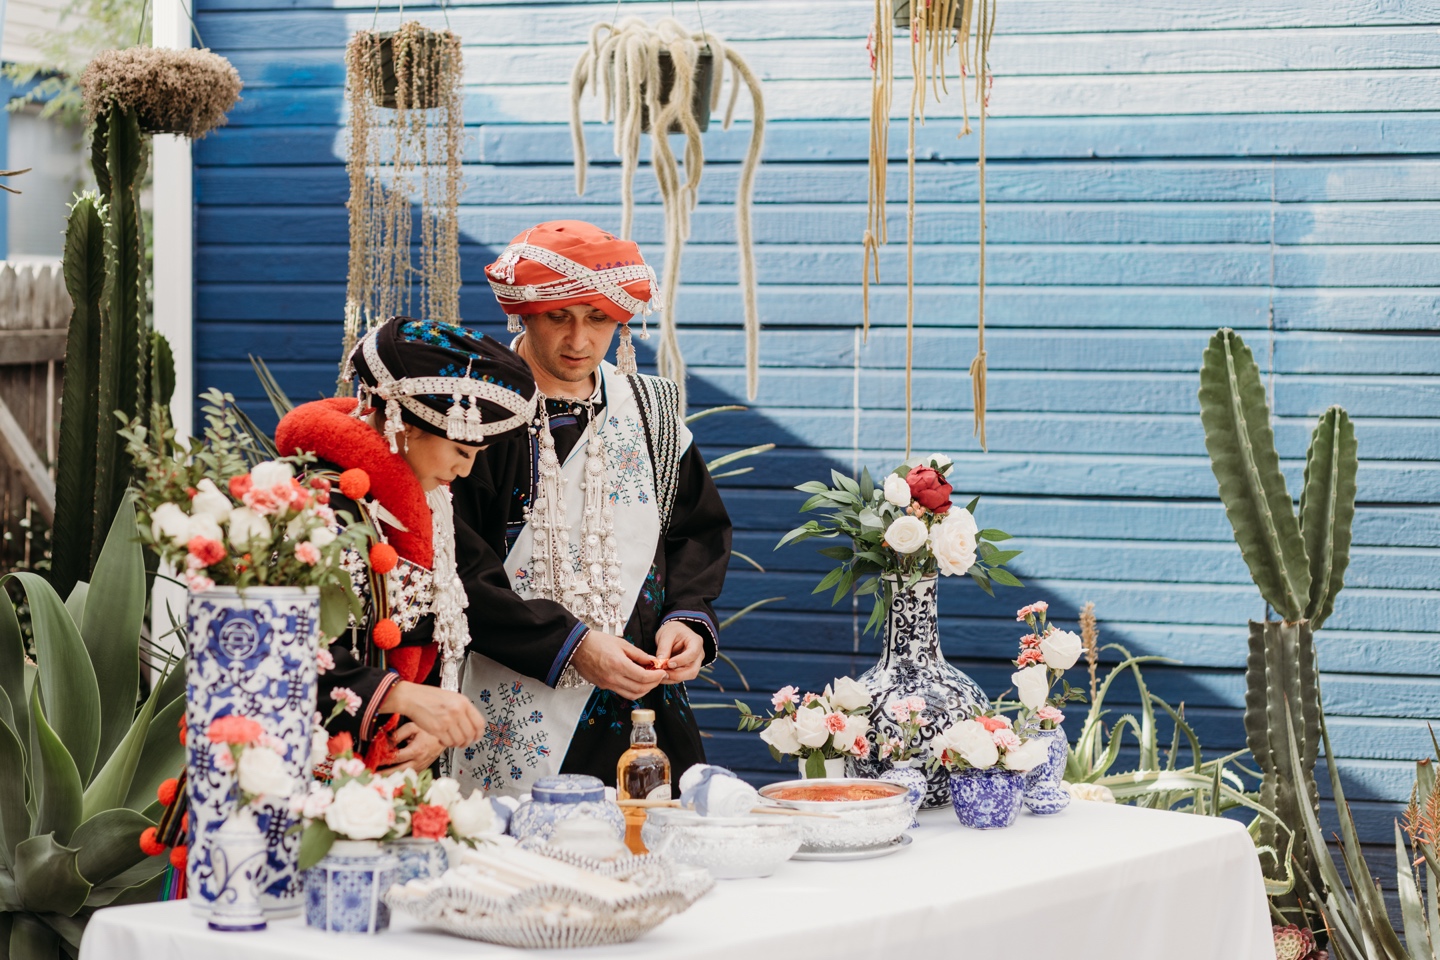 Bride and groom perform a traditional tea ceremony waring traditional Mian wedding attire at their Prickly Pear wedding.